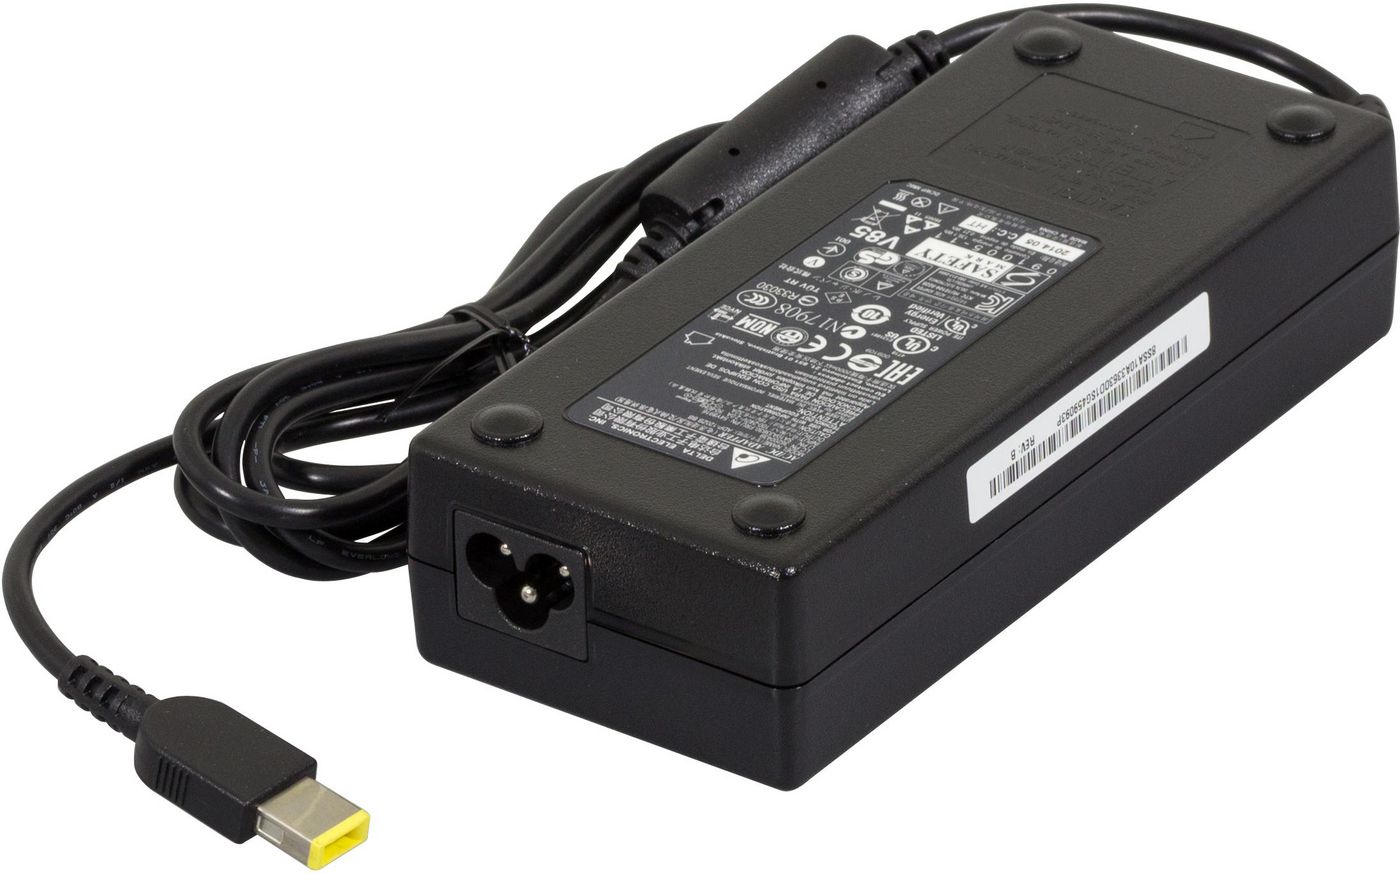 54Y8925 LENOVO AC Adapter 20V 6.0A includes power cable